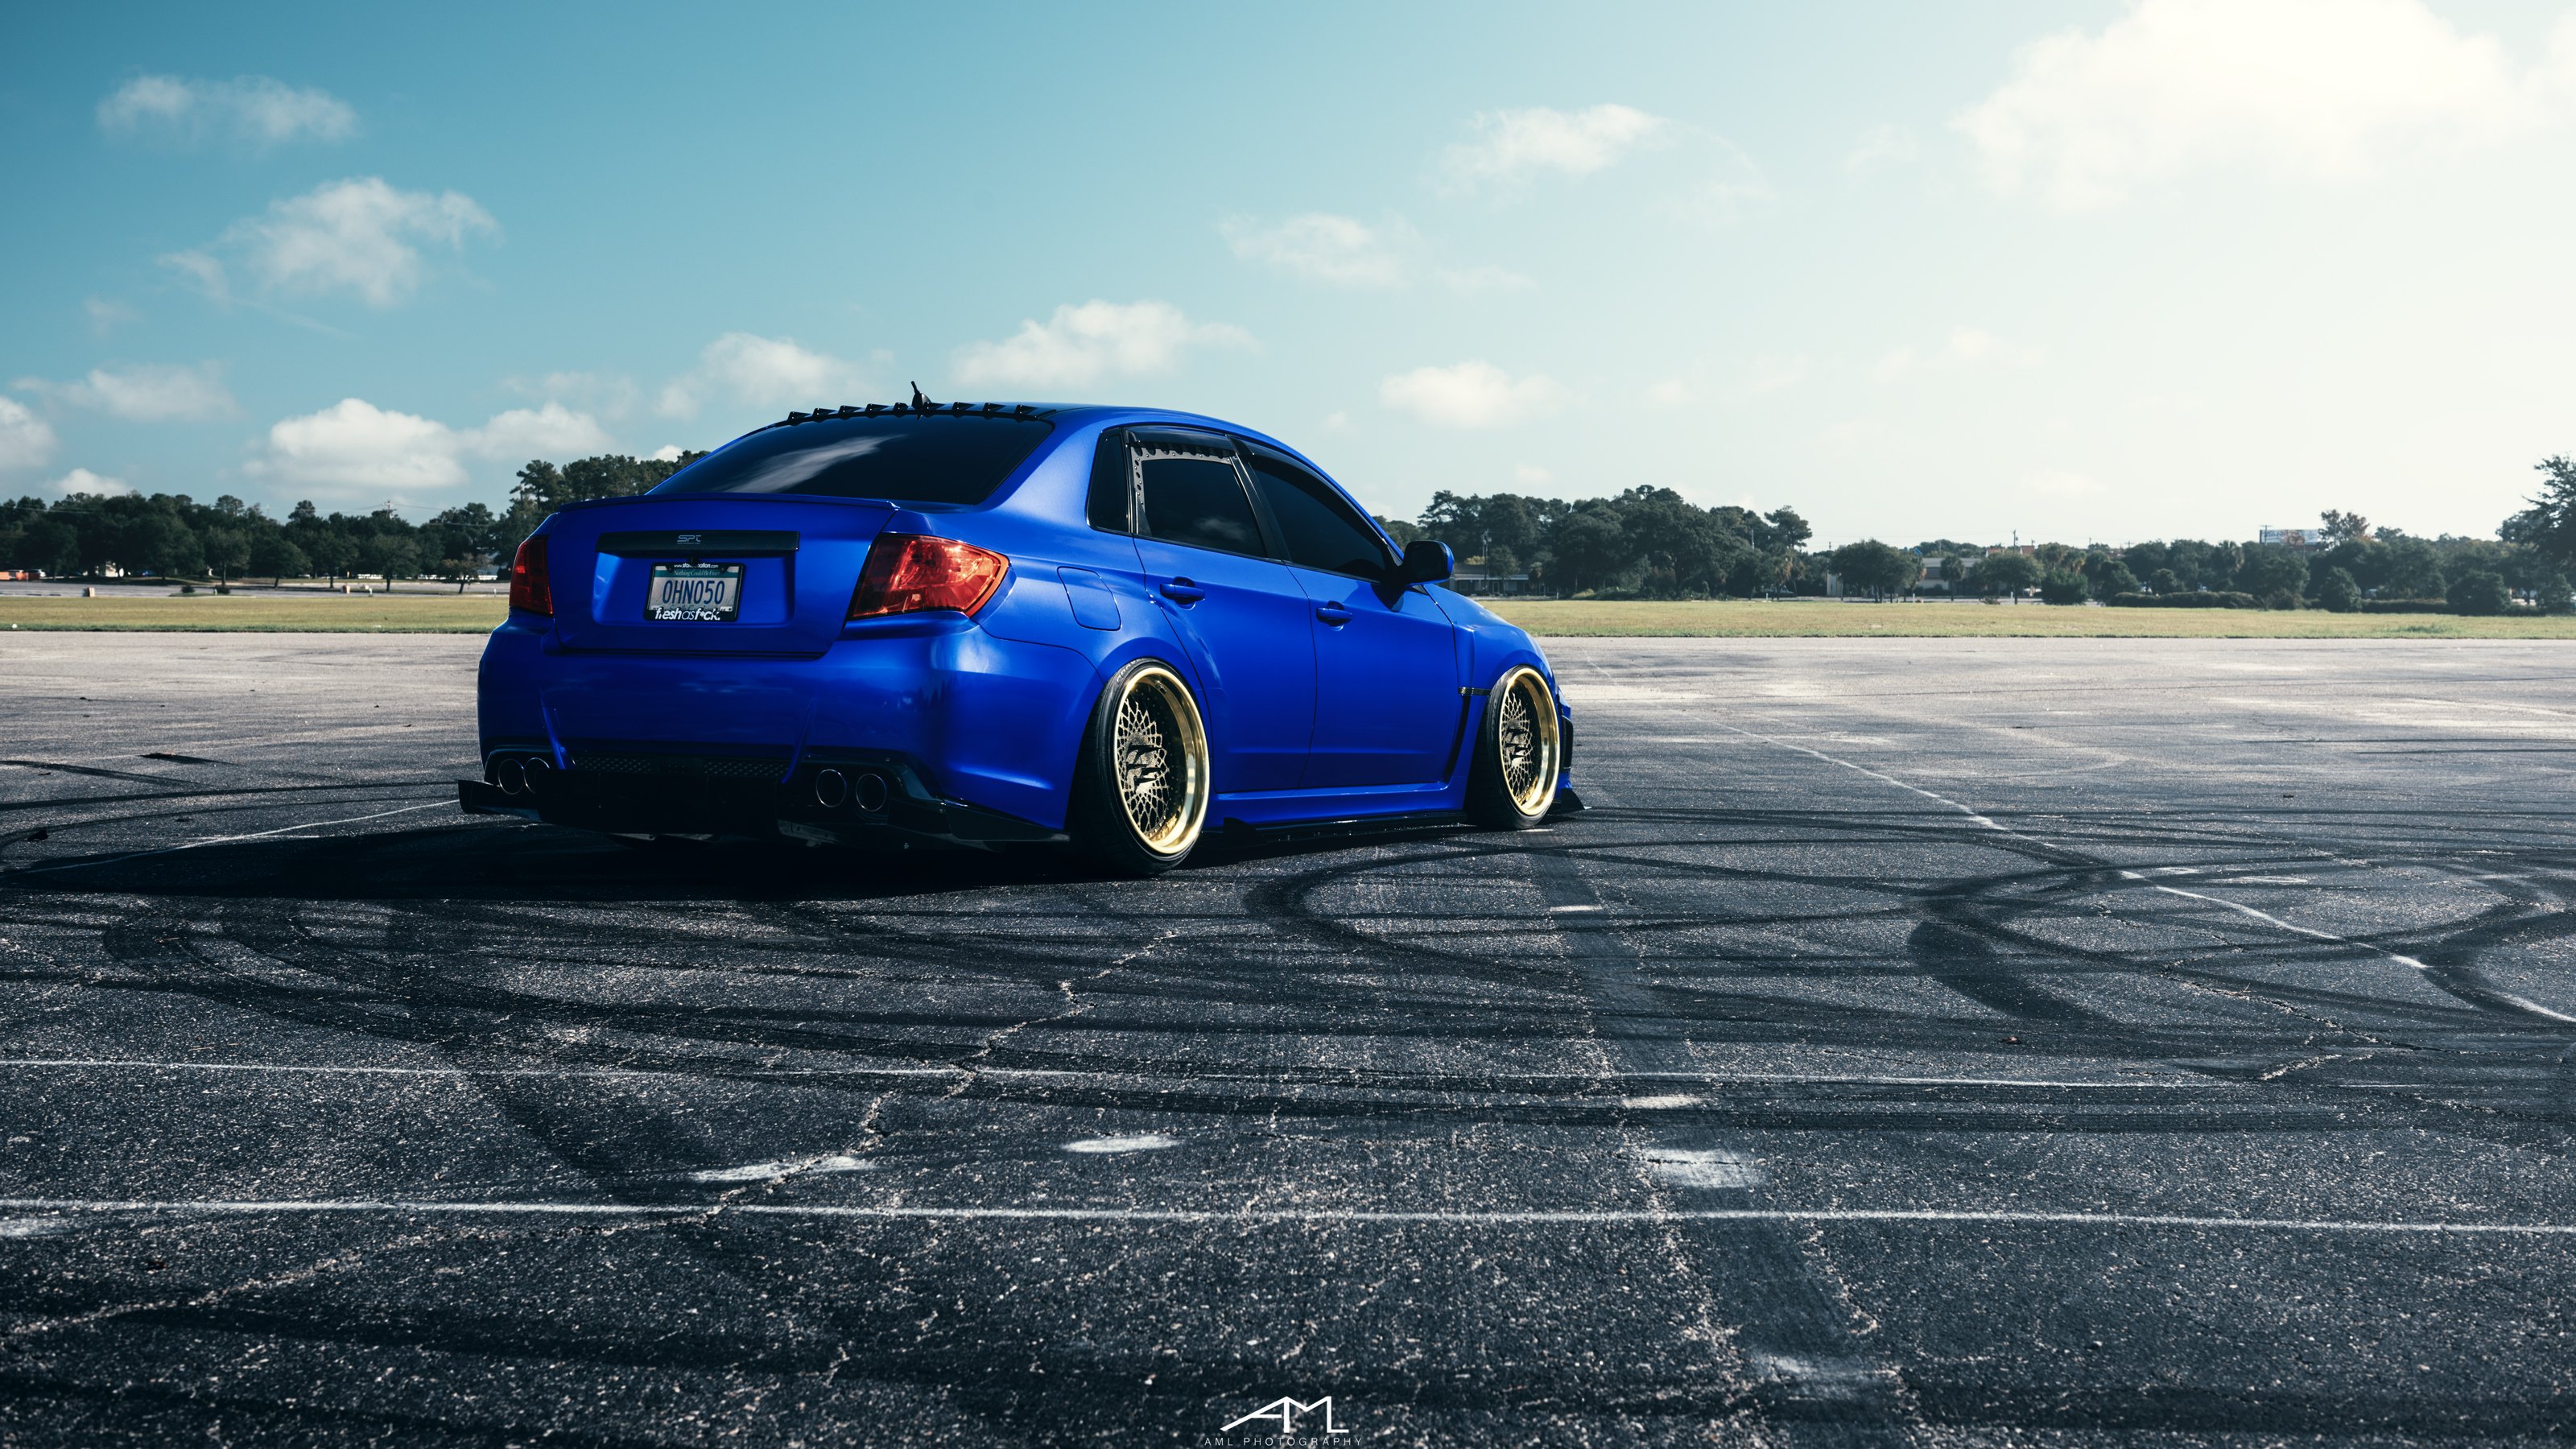 Blue Stanced Subaru WRX with Aftermarket Rear Diffuser - Photo by Arlen Liv...